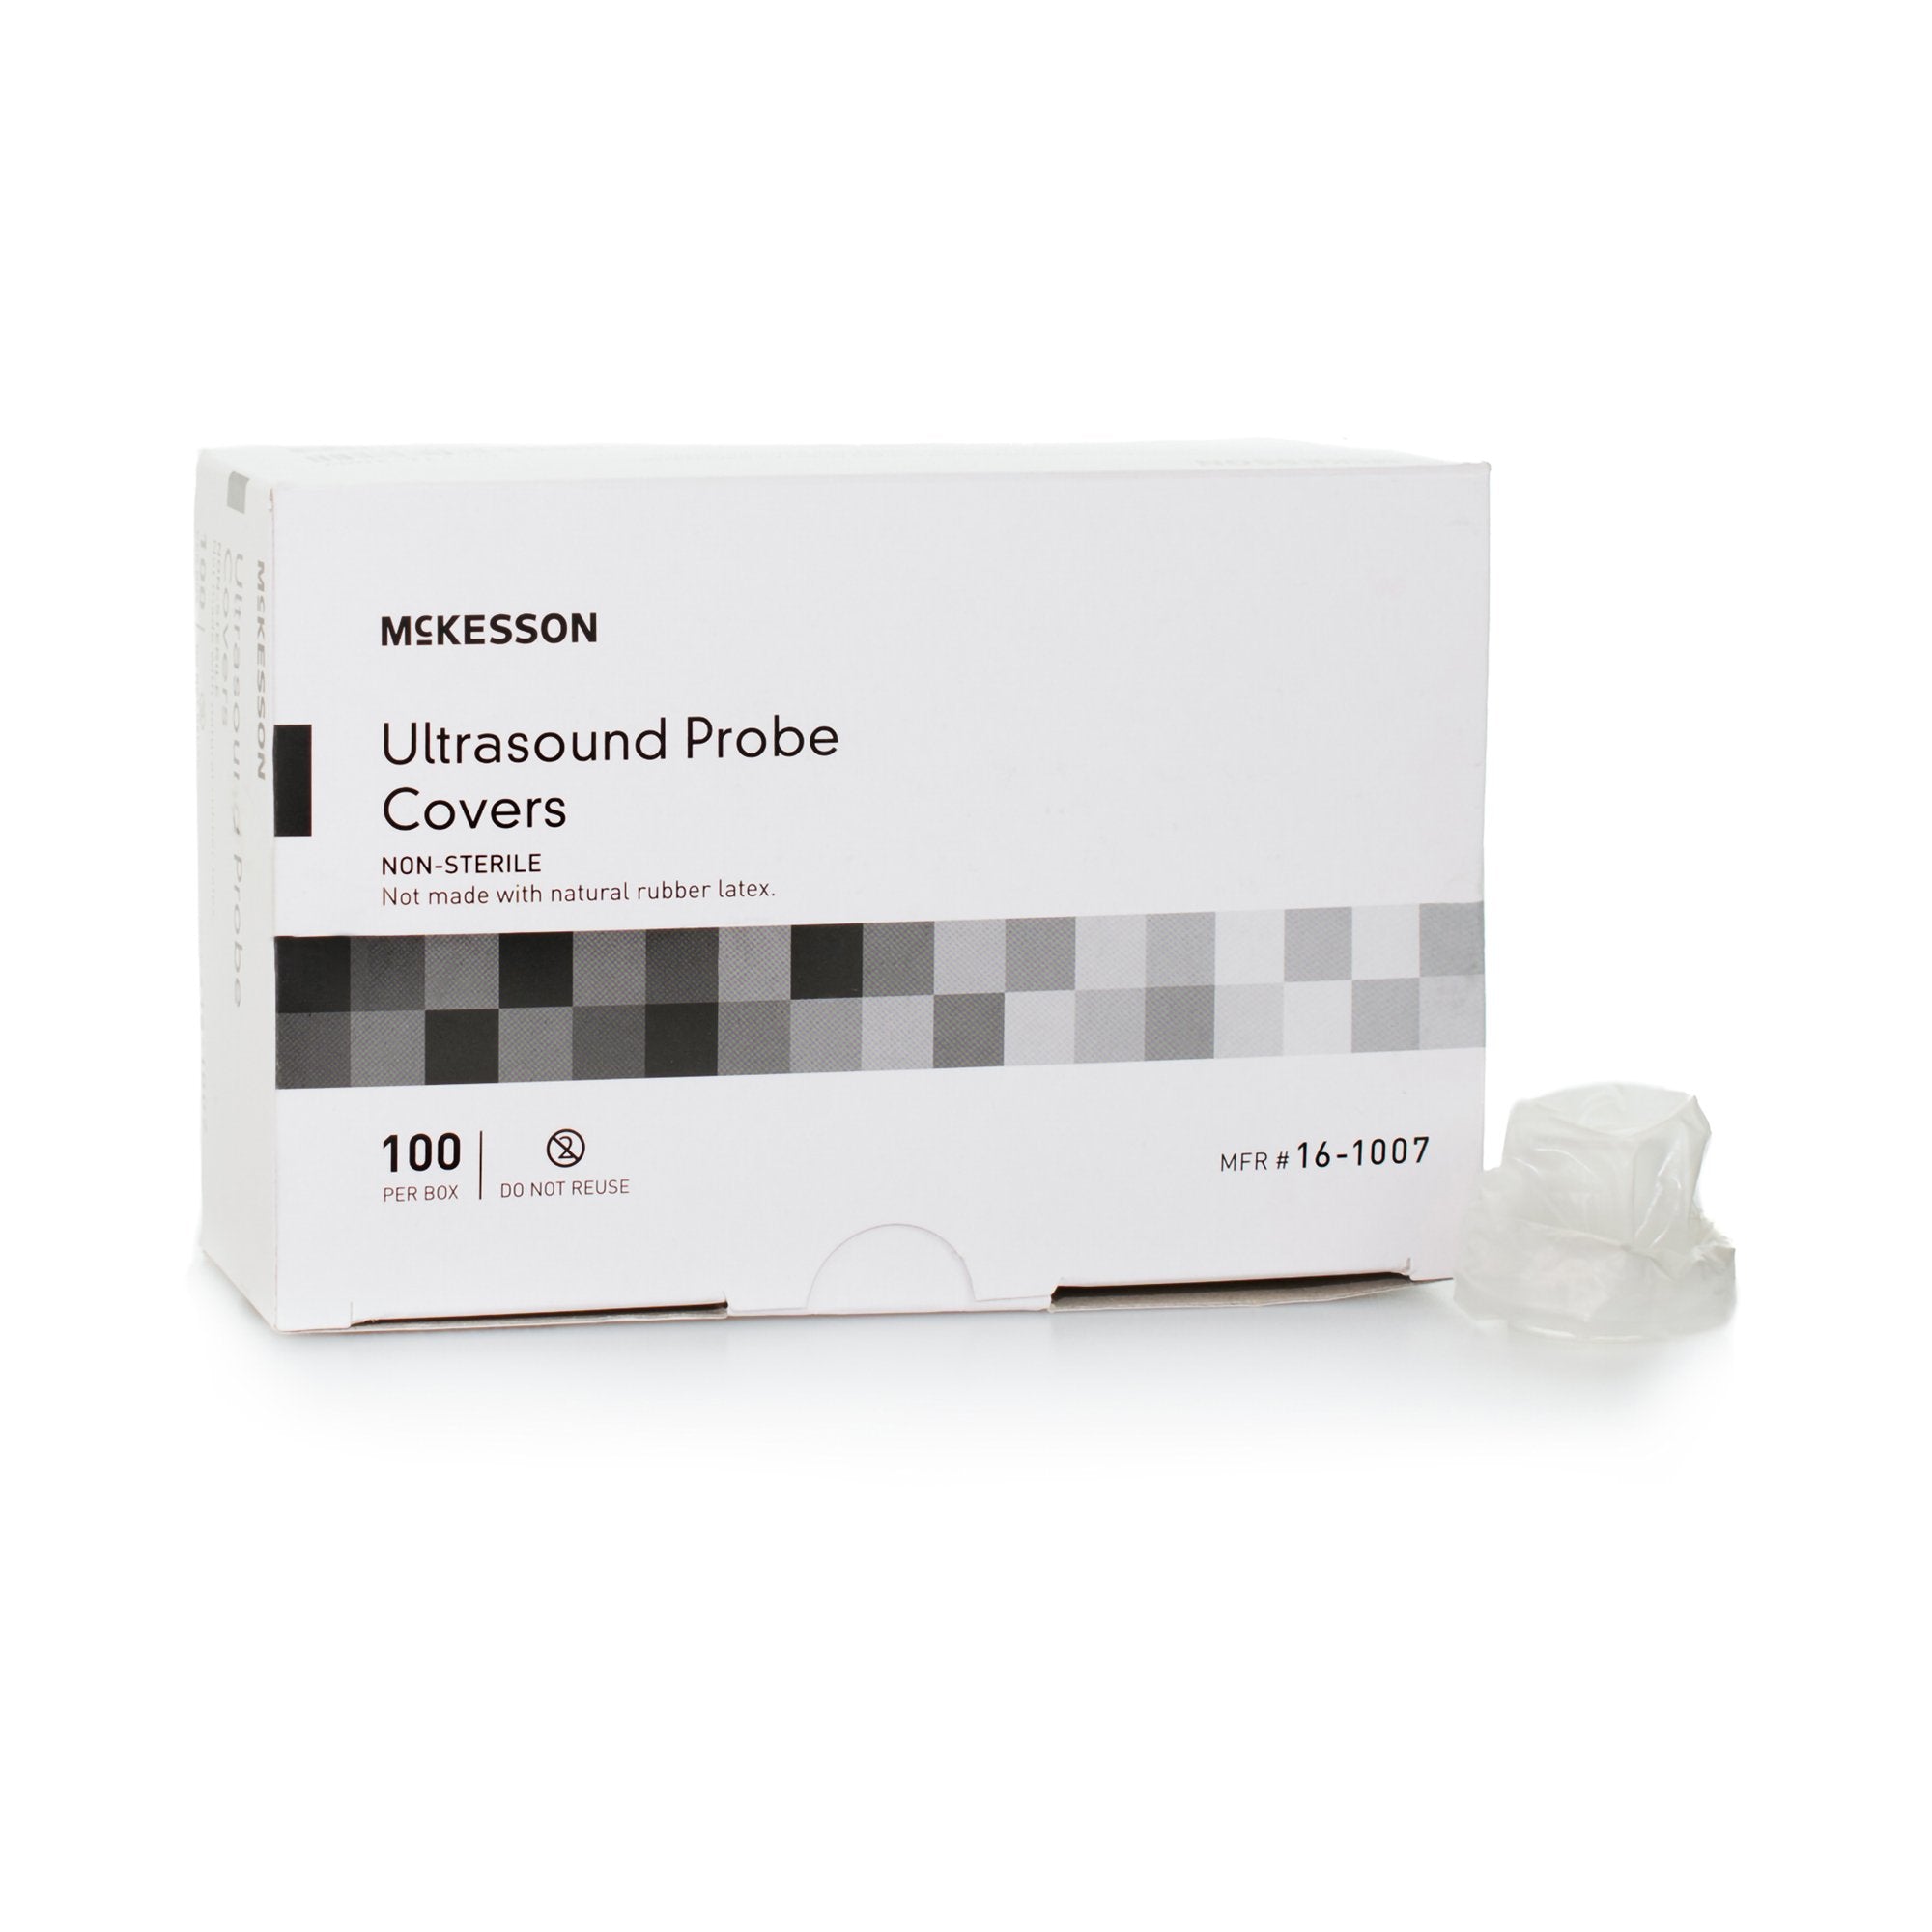 Ultrasound Probe Cover McKesson 1 X 9 Inch Polyurethane NonSterile For use with Ultrasound Probe